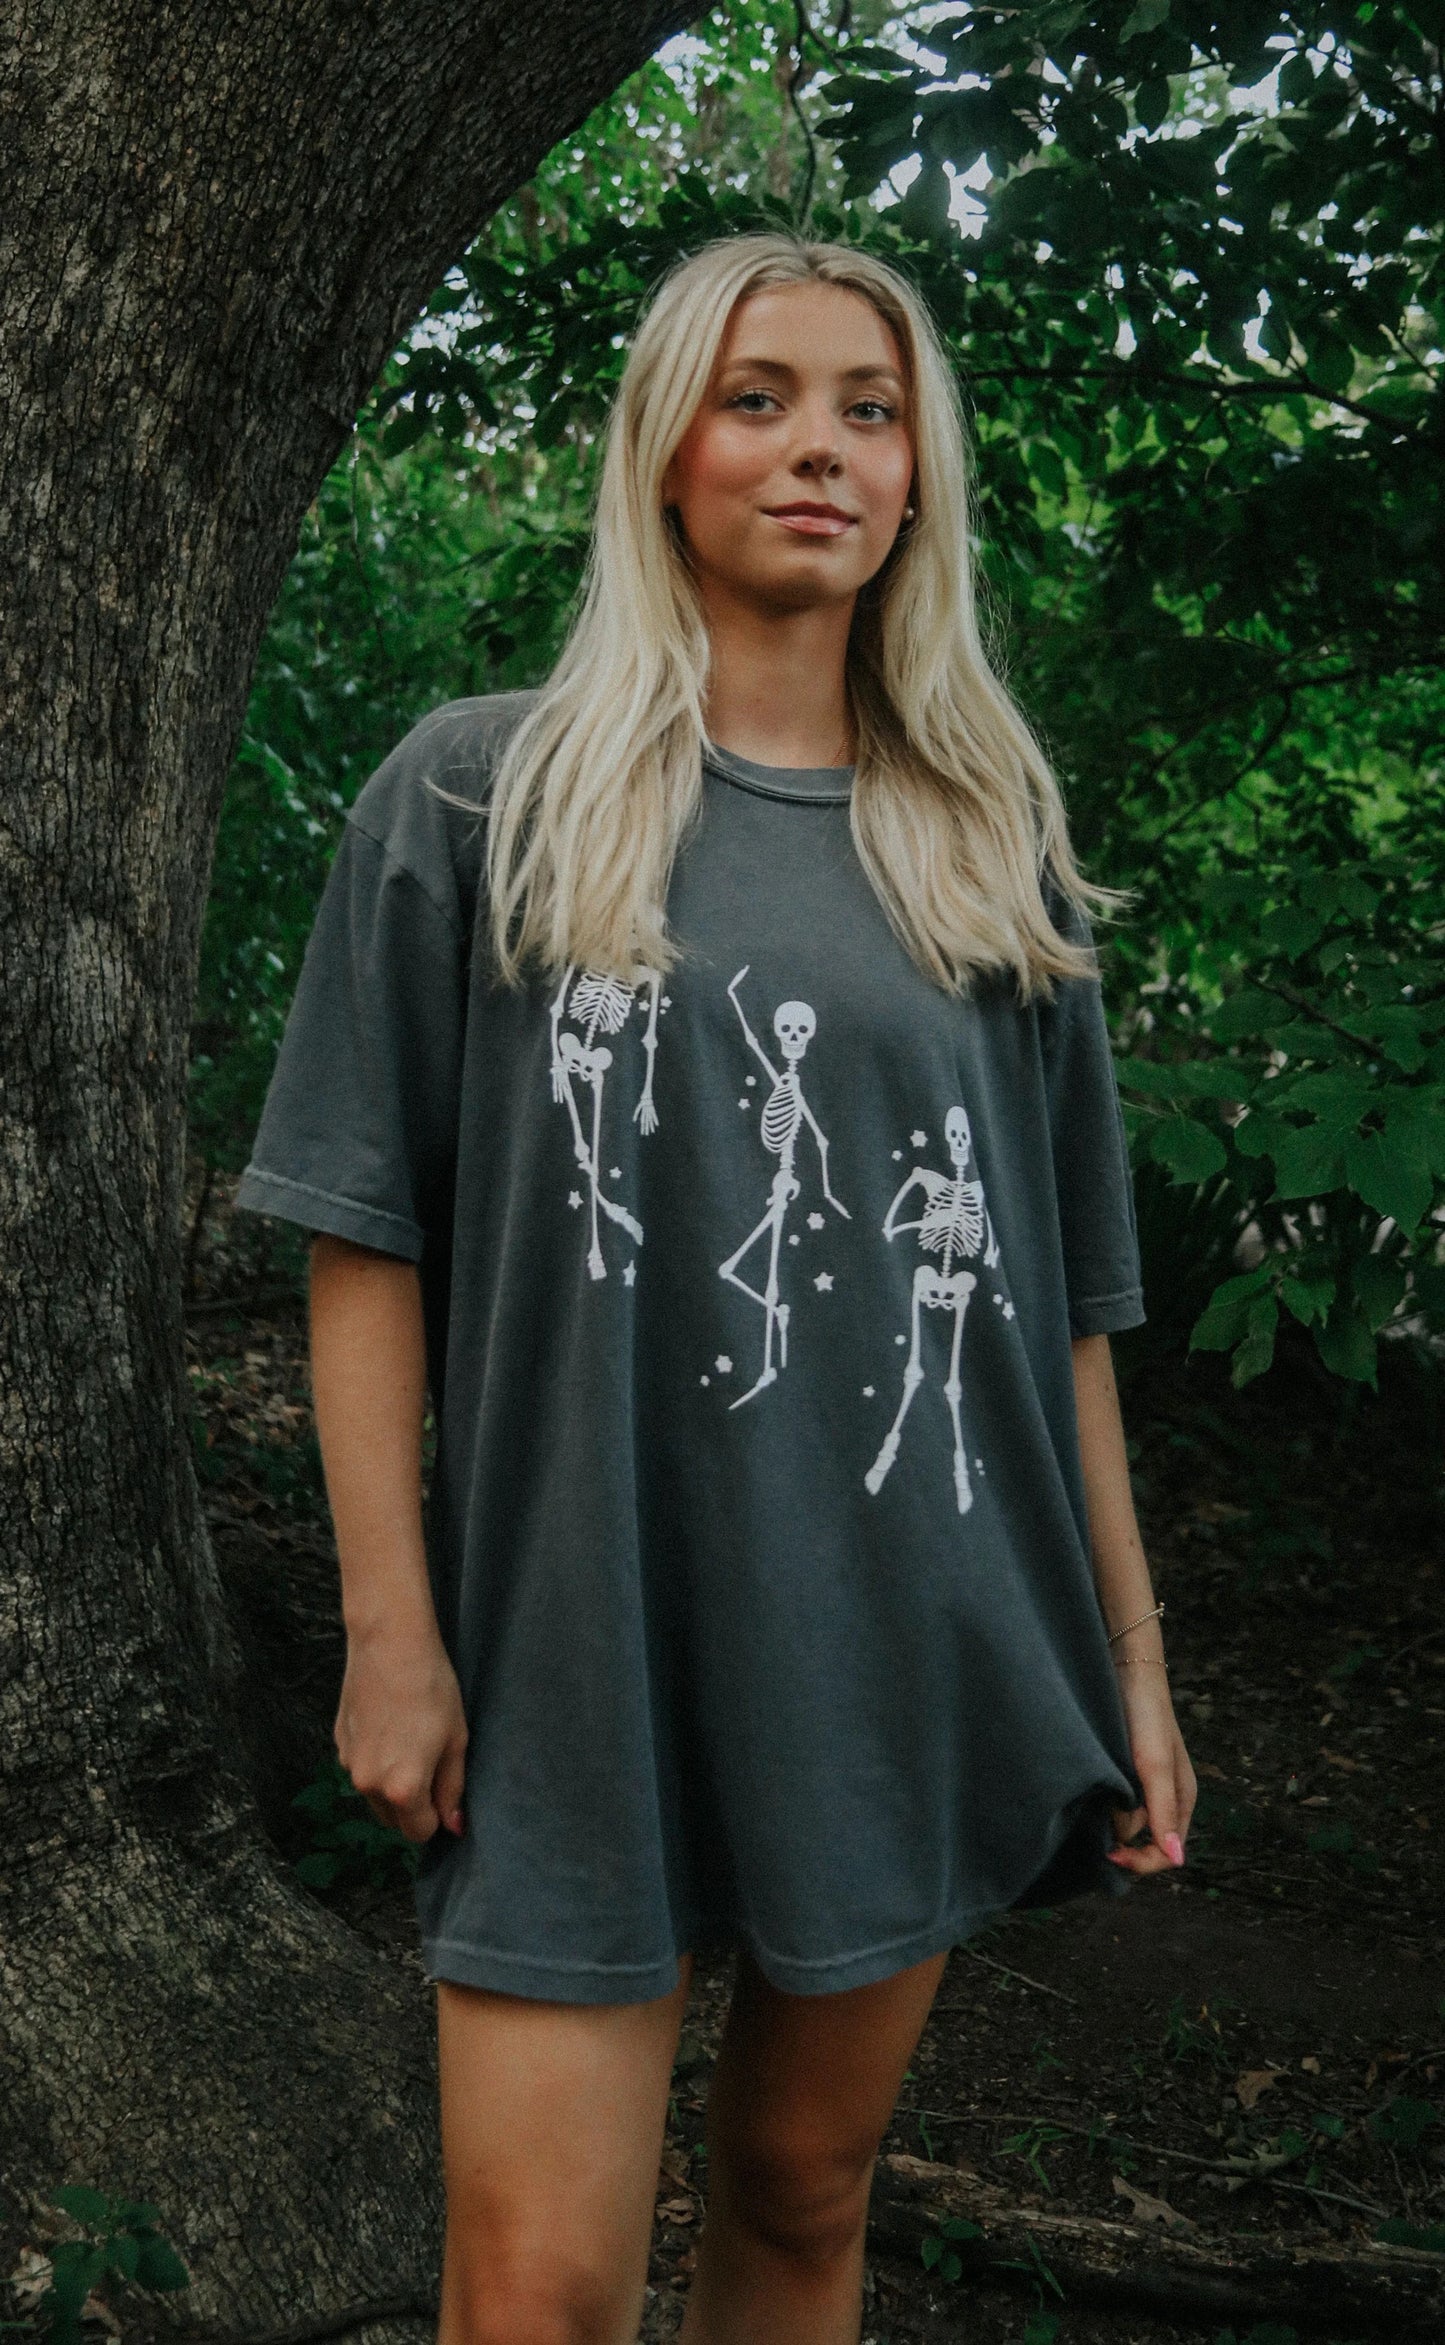 Oversized Grey T-Shirt With Dancing Skeletons